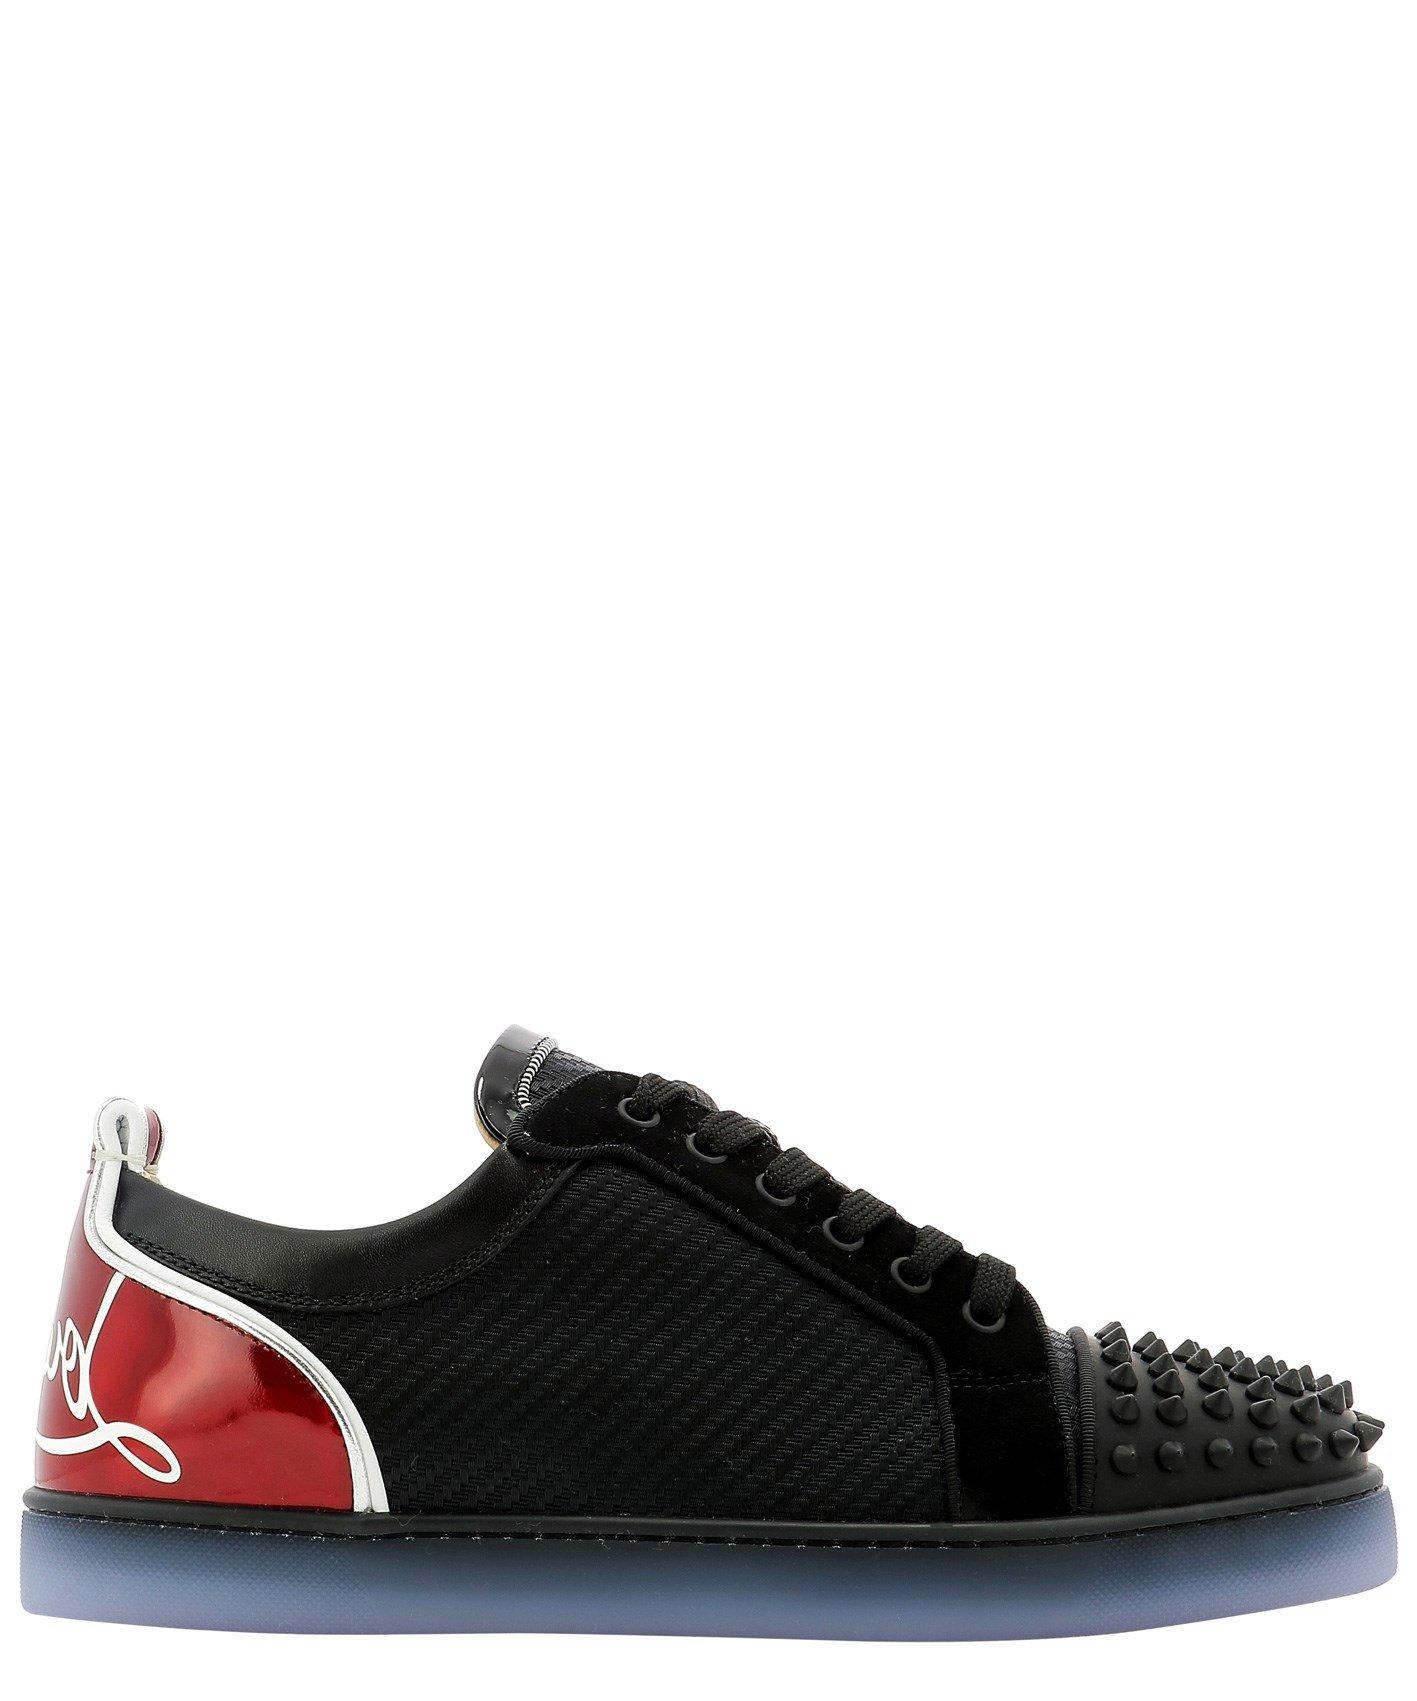 Louis Spikes - Sneakers - Calf leather and spikes - Black - Christian  Louboutin Canada